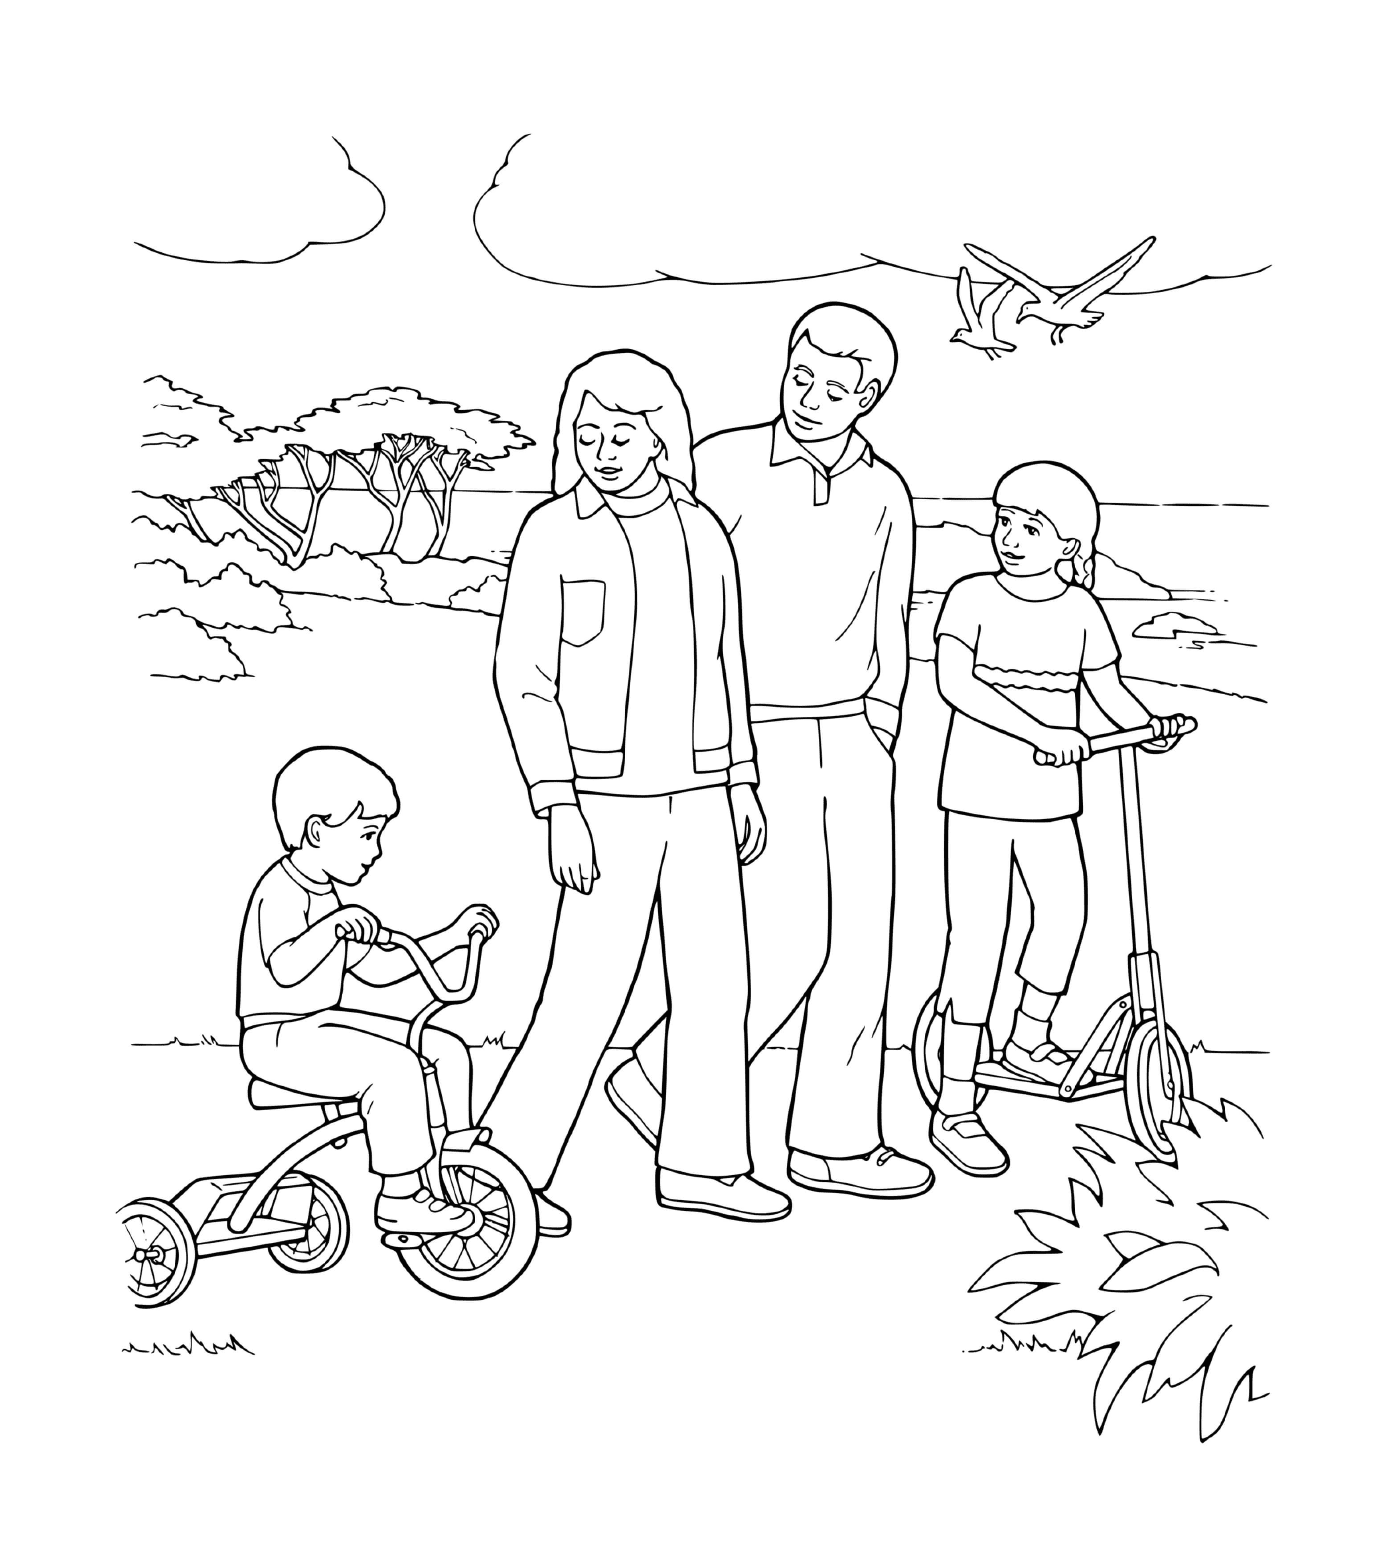  A family activity at the park by bike 